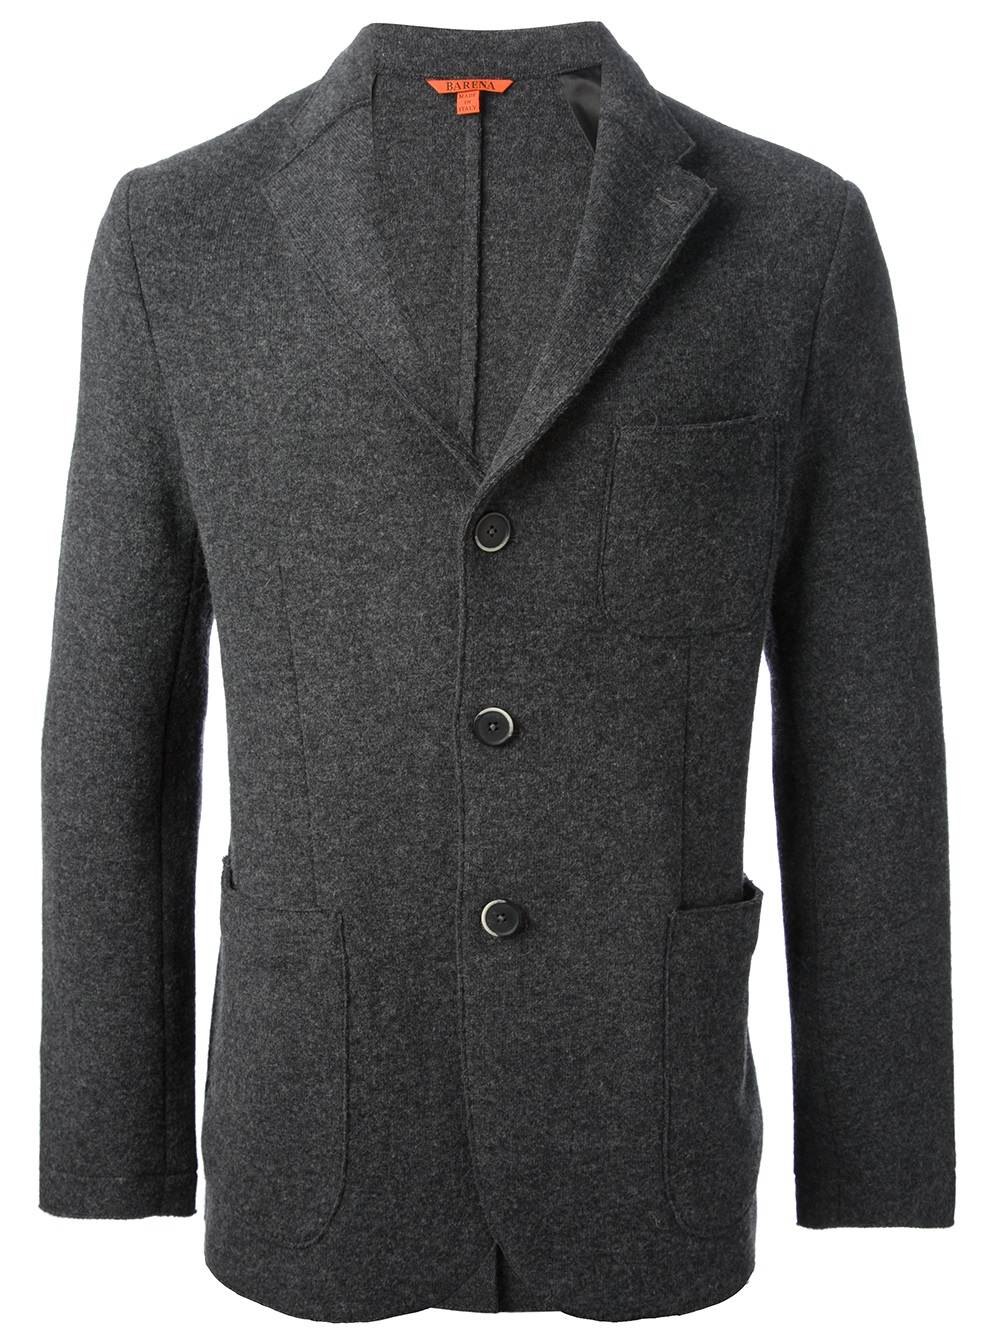 Need help, to find grey wool peacoat - pic inside! | Styleforum